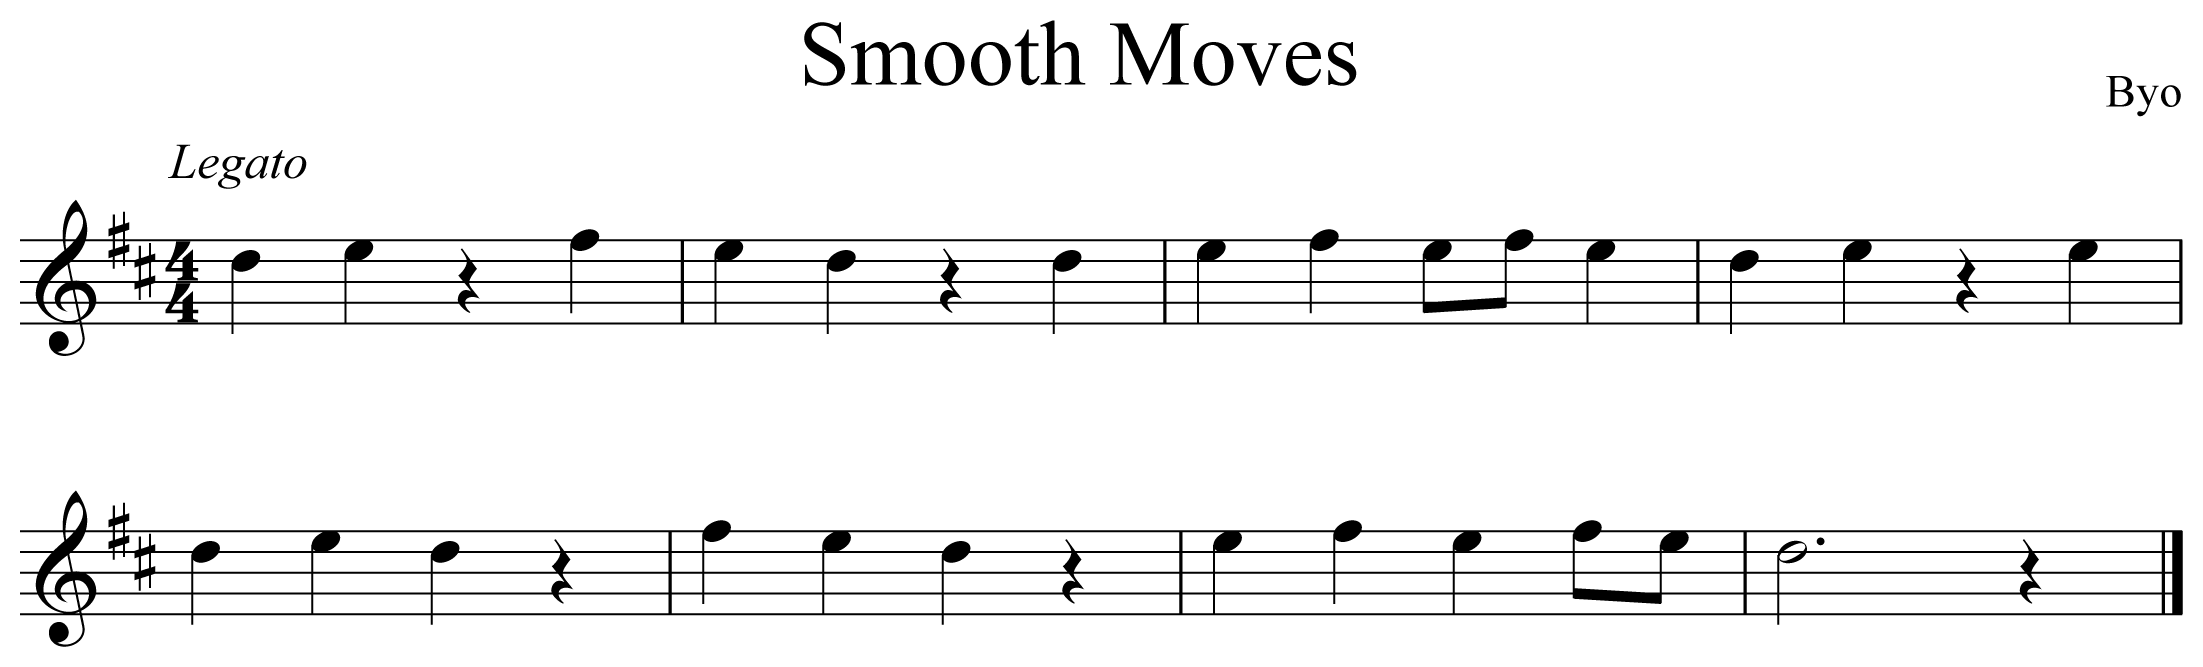 Smooth Moves Music Notation Saxophone